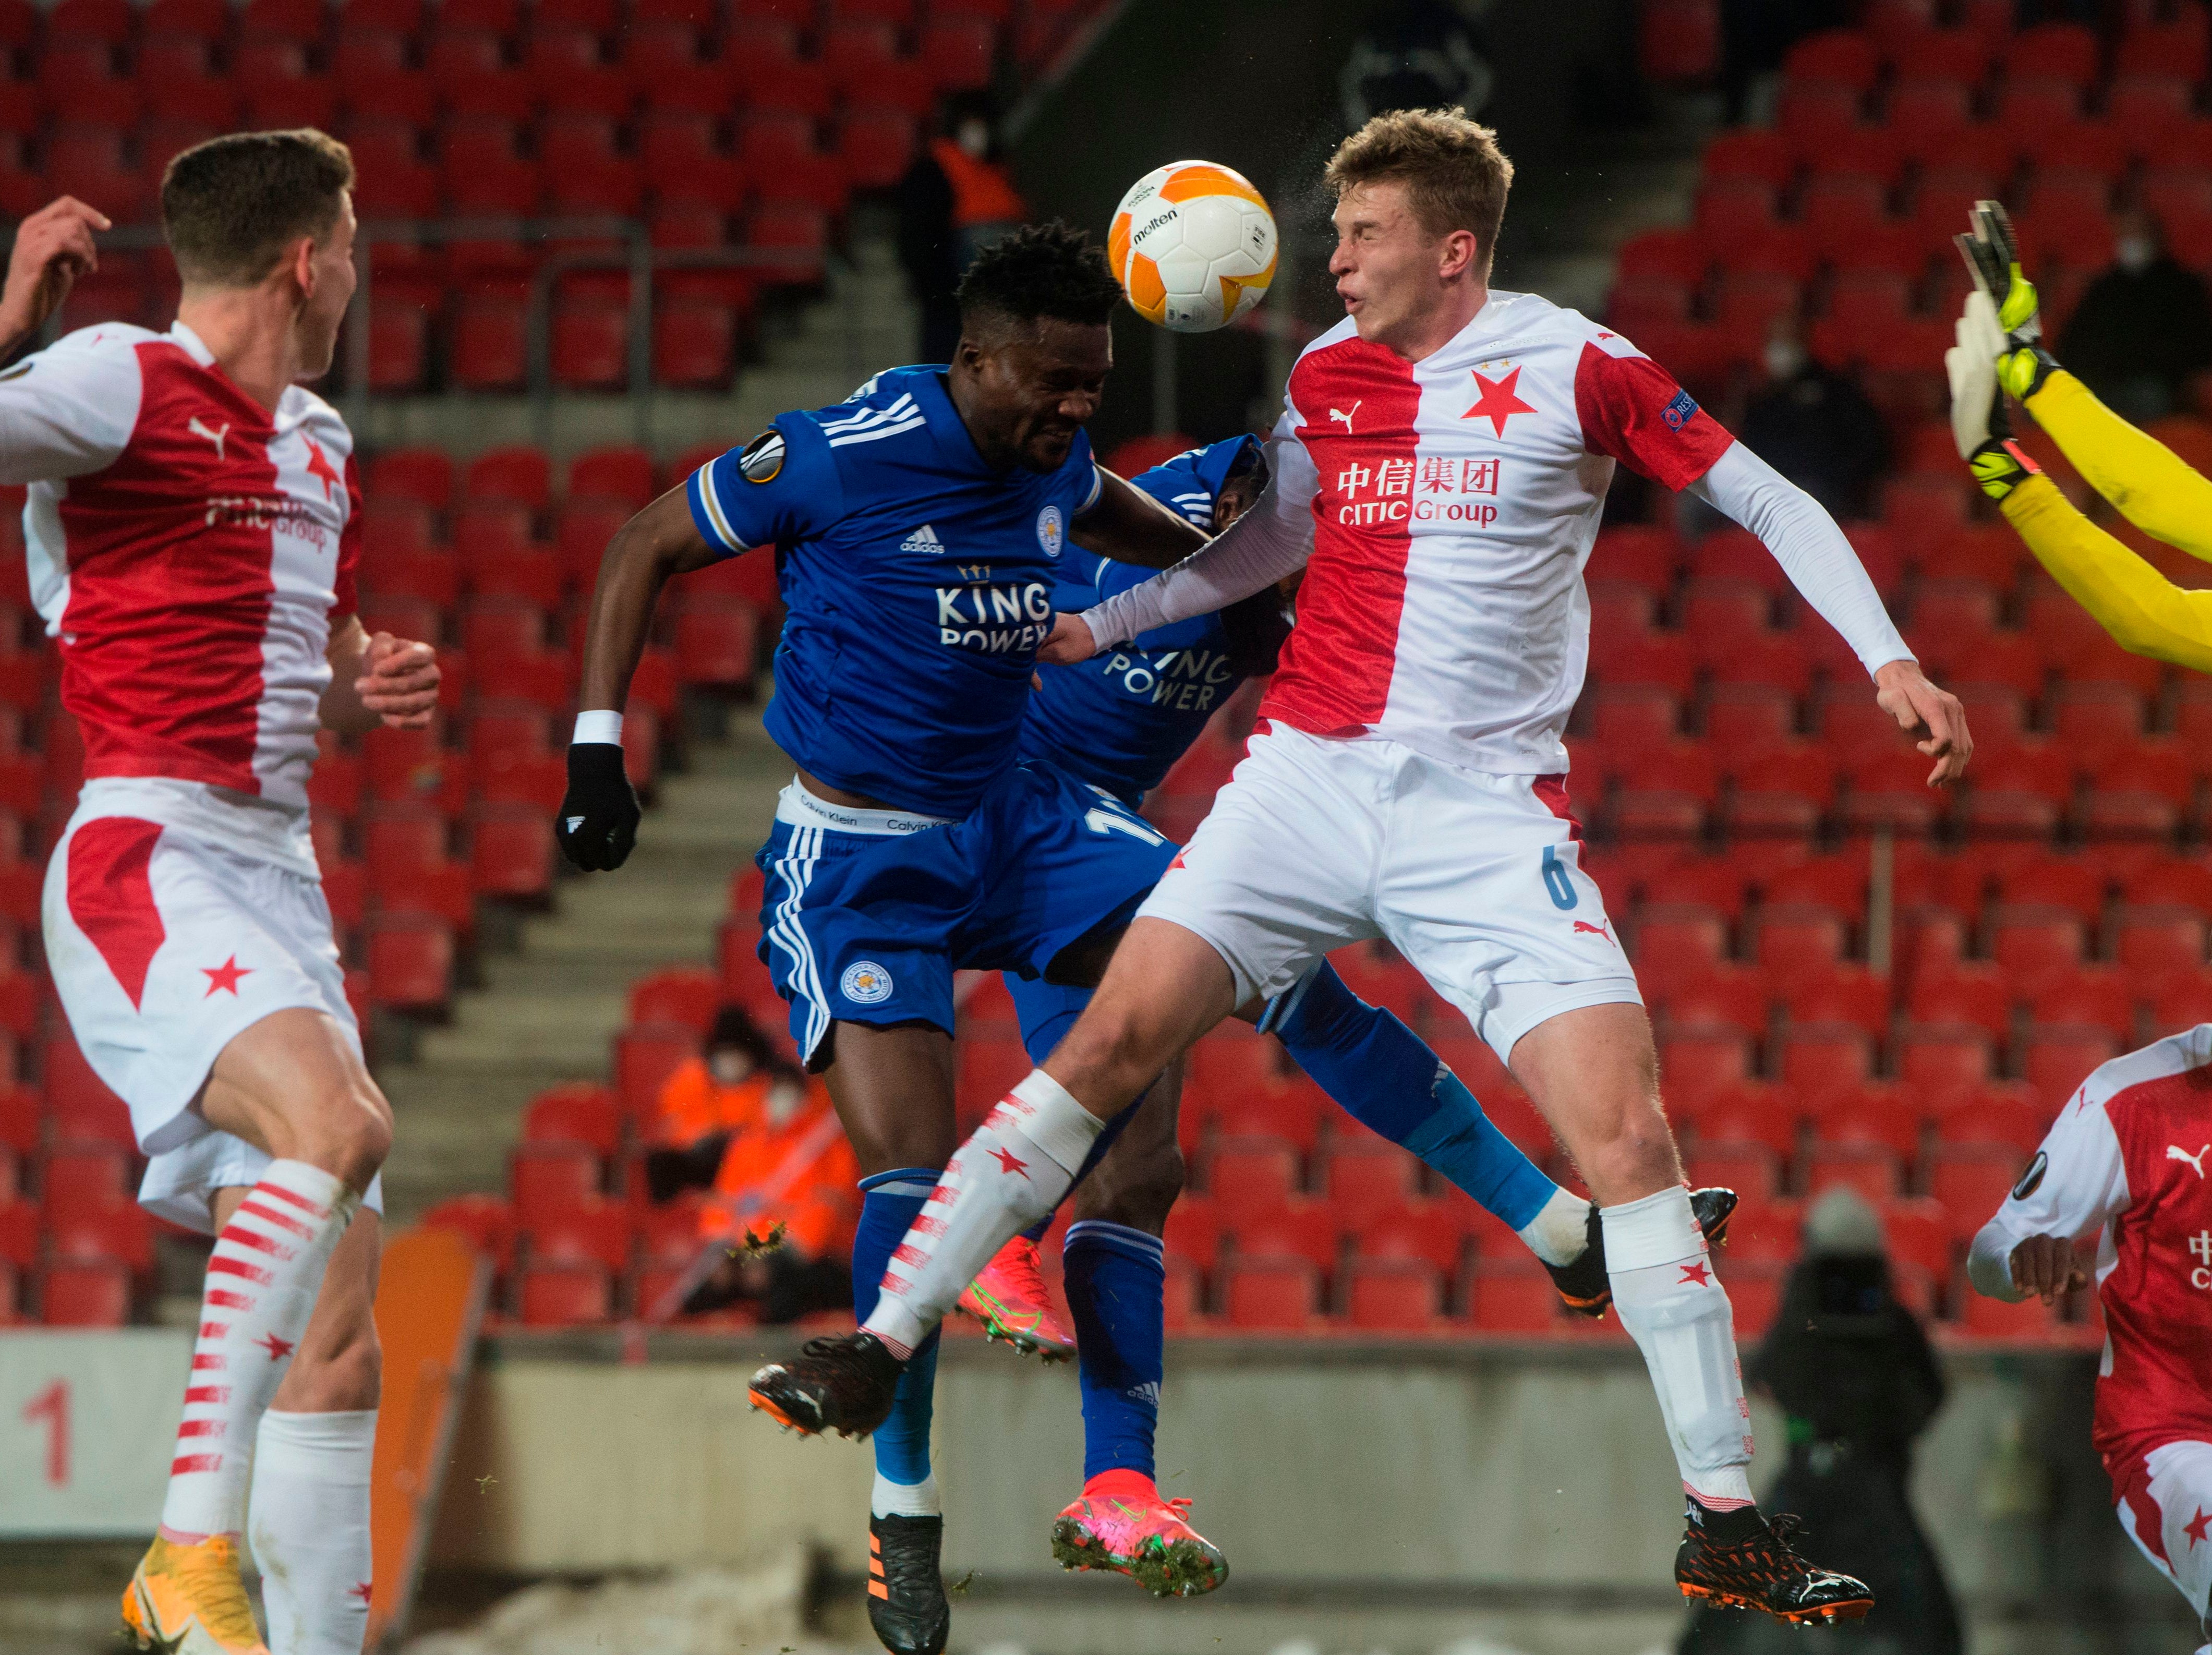 Slavia Prague hold Leicester to goalless draw in first leg of